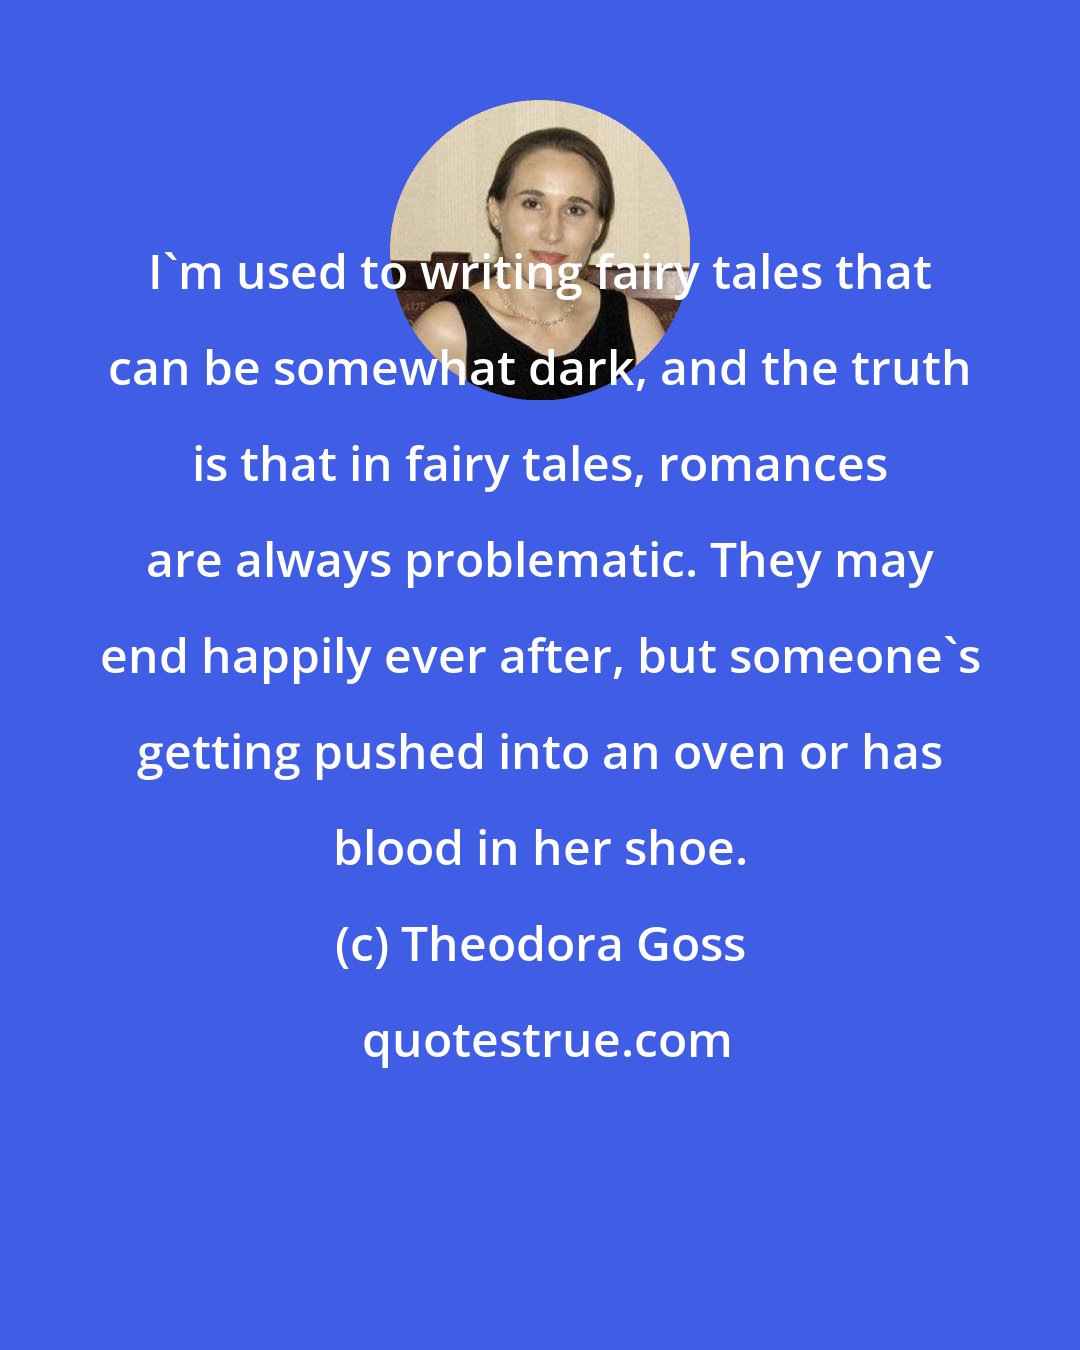 Theodora Goss: I'm used to writing fairy tales that can be somewhat dark, and the truth is that in fairy tales, romances are always problematic. They may end happily ever after, but someone's getting pushed into an oven or has blood in her shoe.